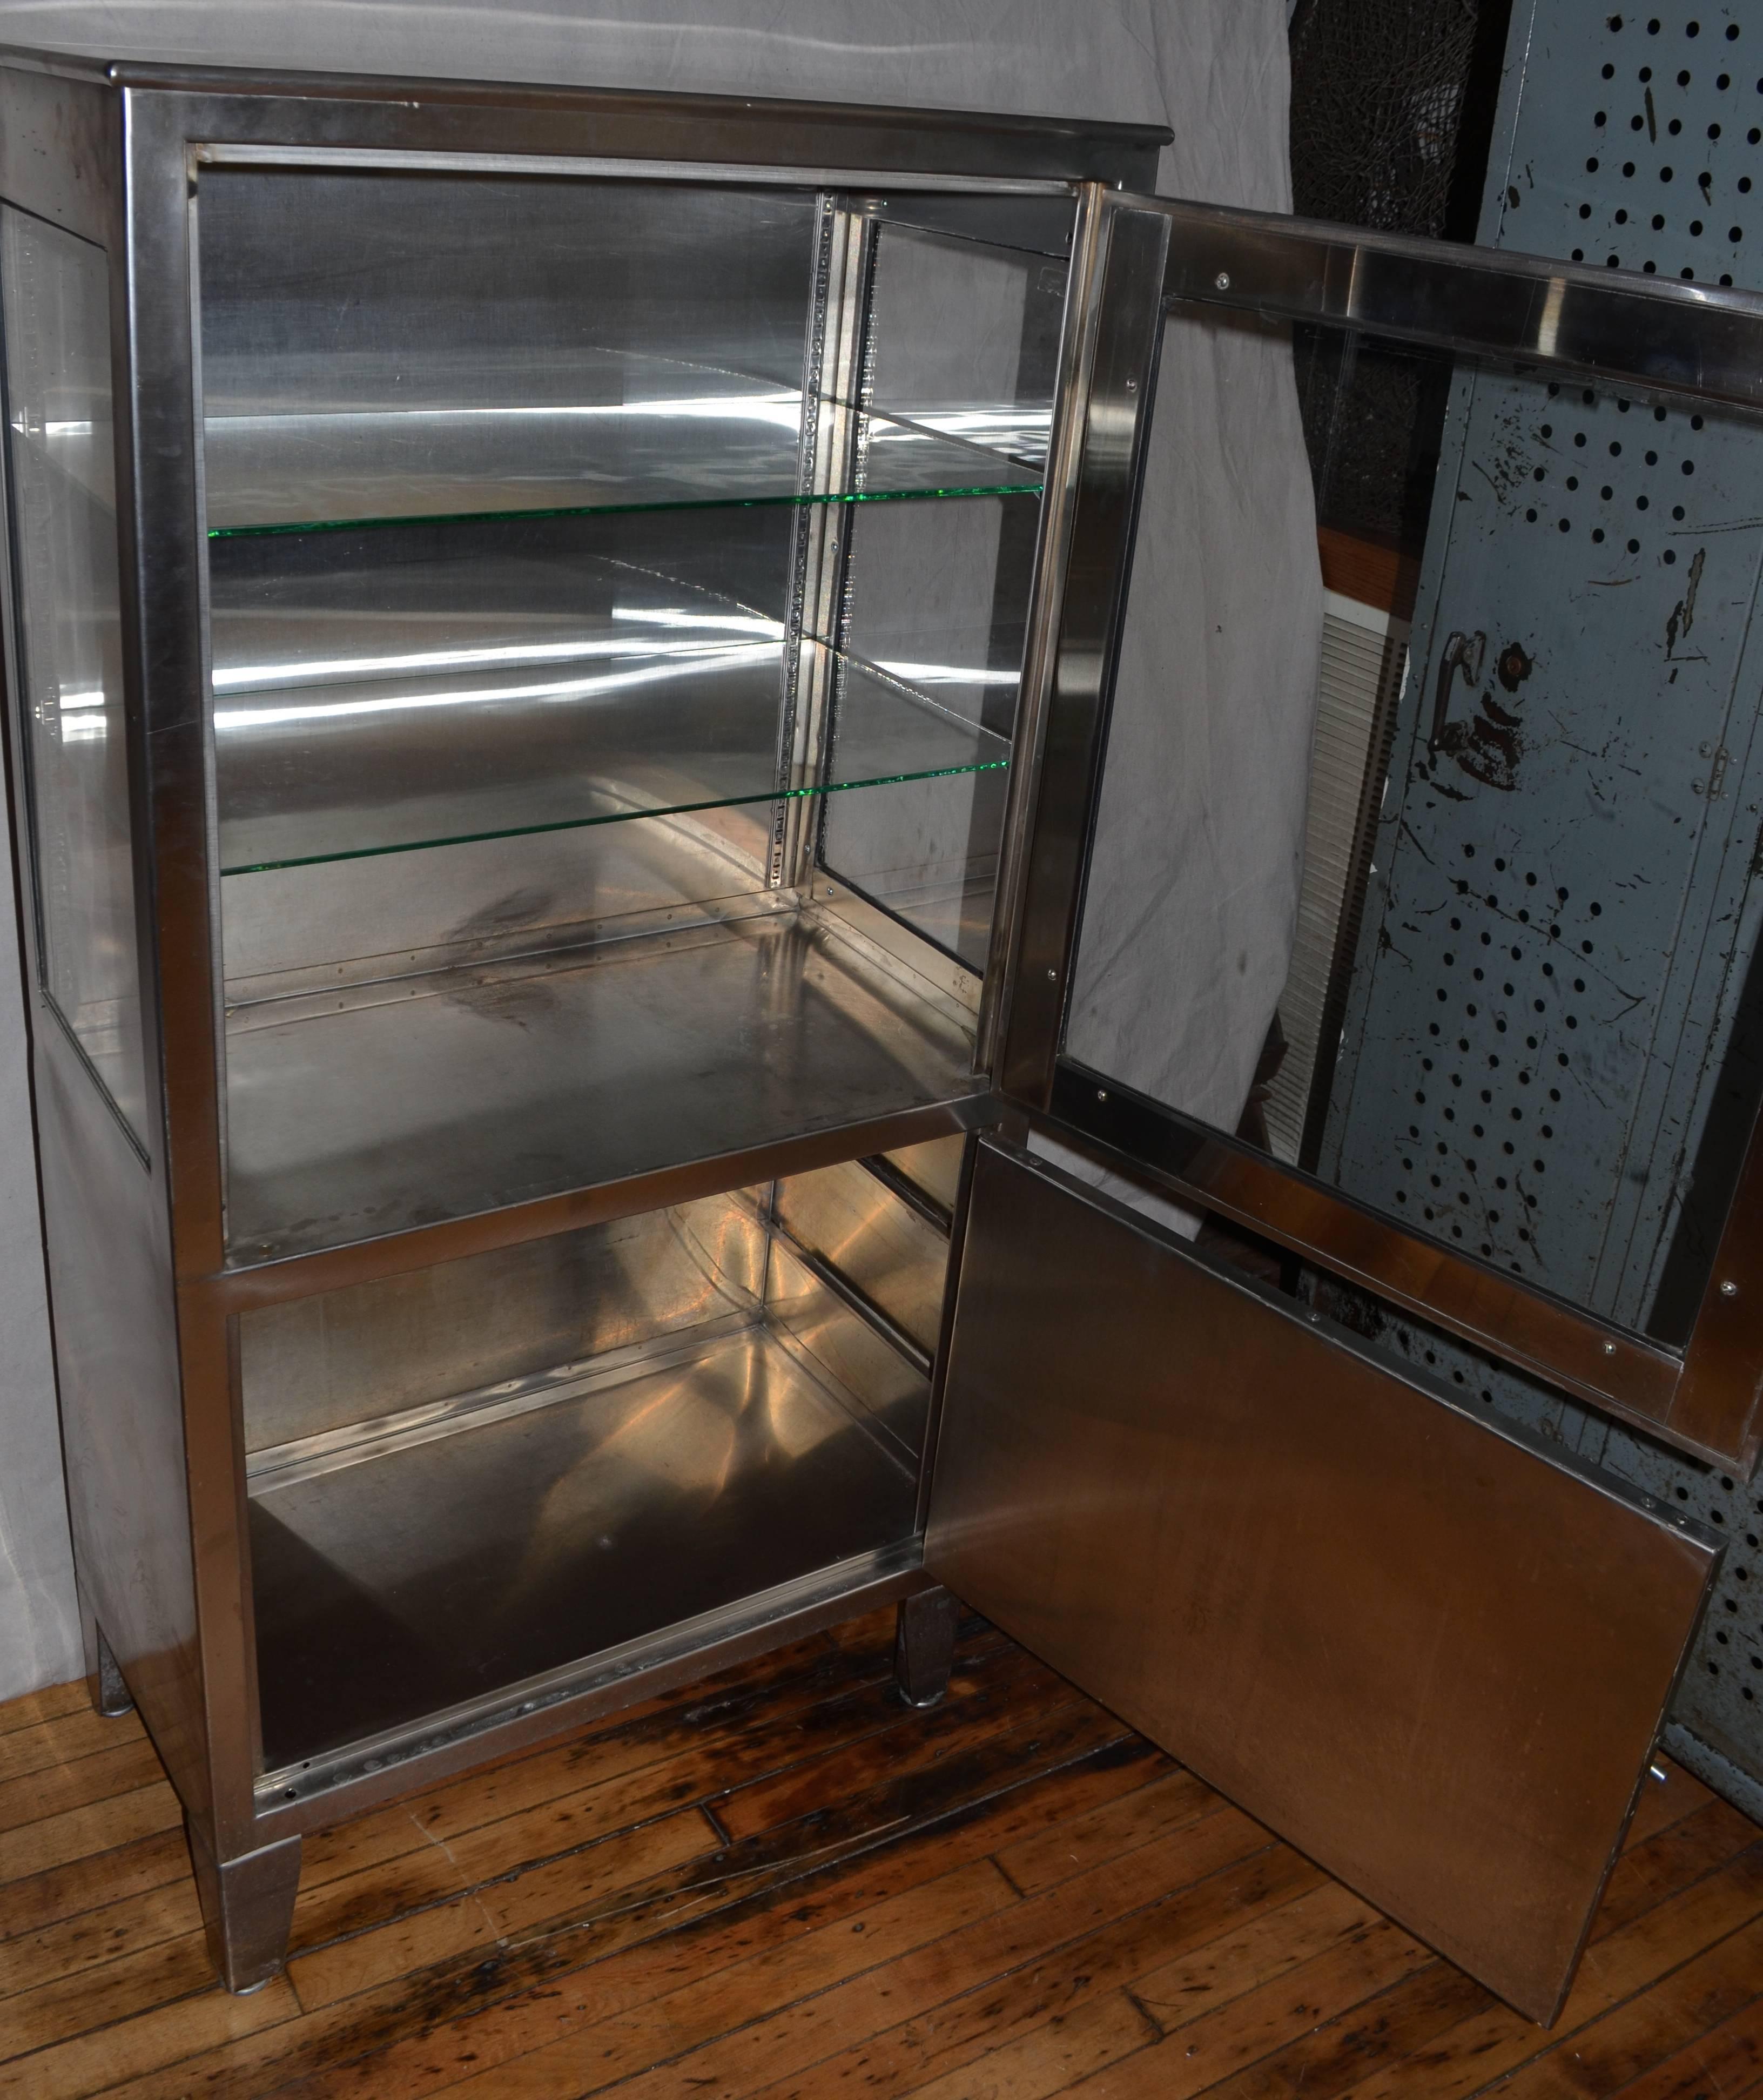 North American Medical Dental Lab Cabinet of Stainless Steel and Glass, Vintage Industrial 